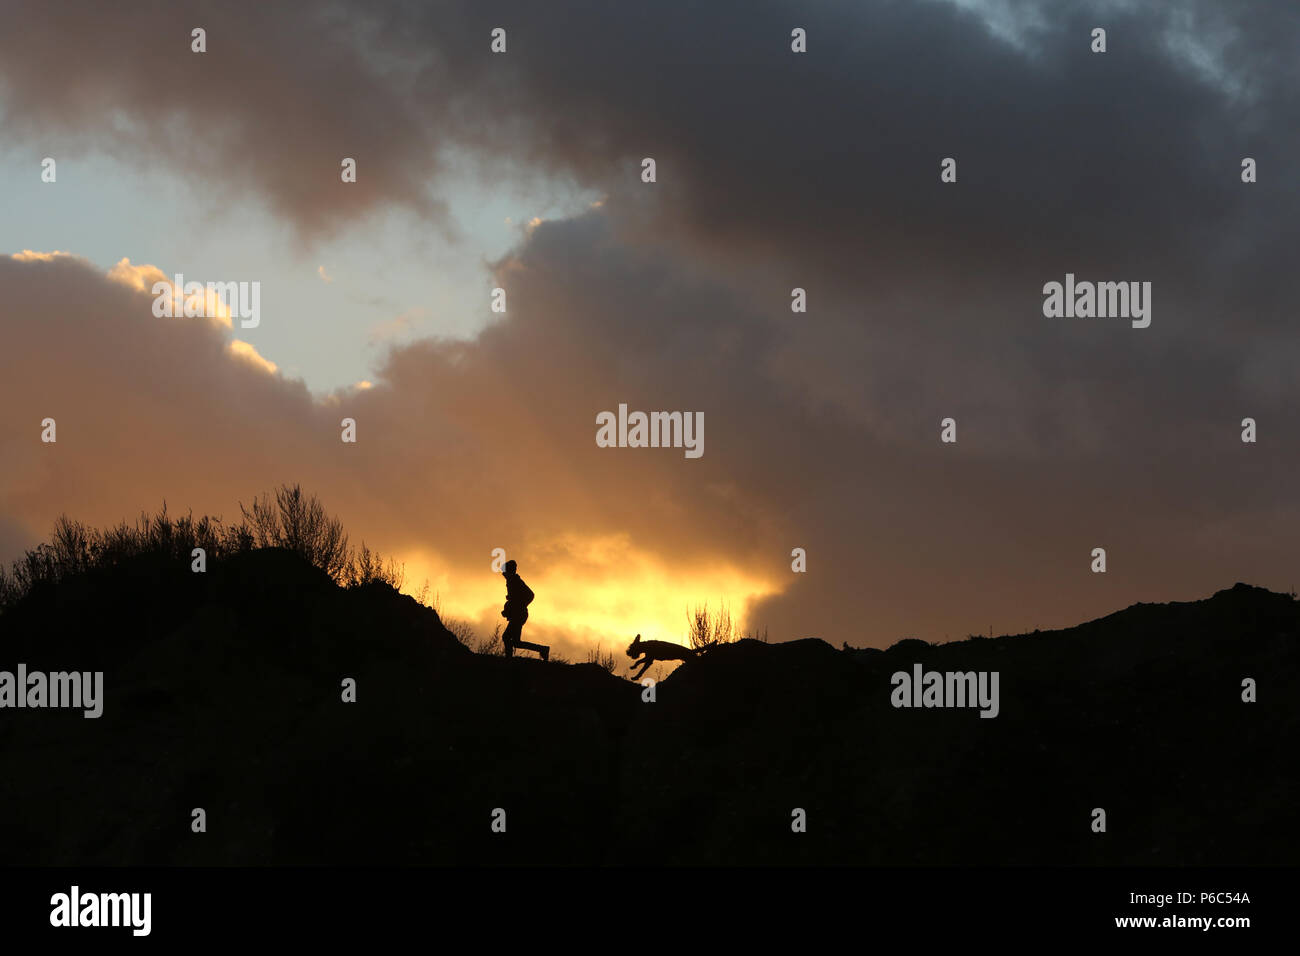 Wustrow, Germany - silhouette, boy runs at sunset with his dog over a dune Stock Photo